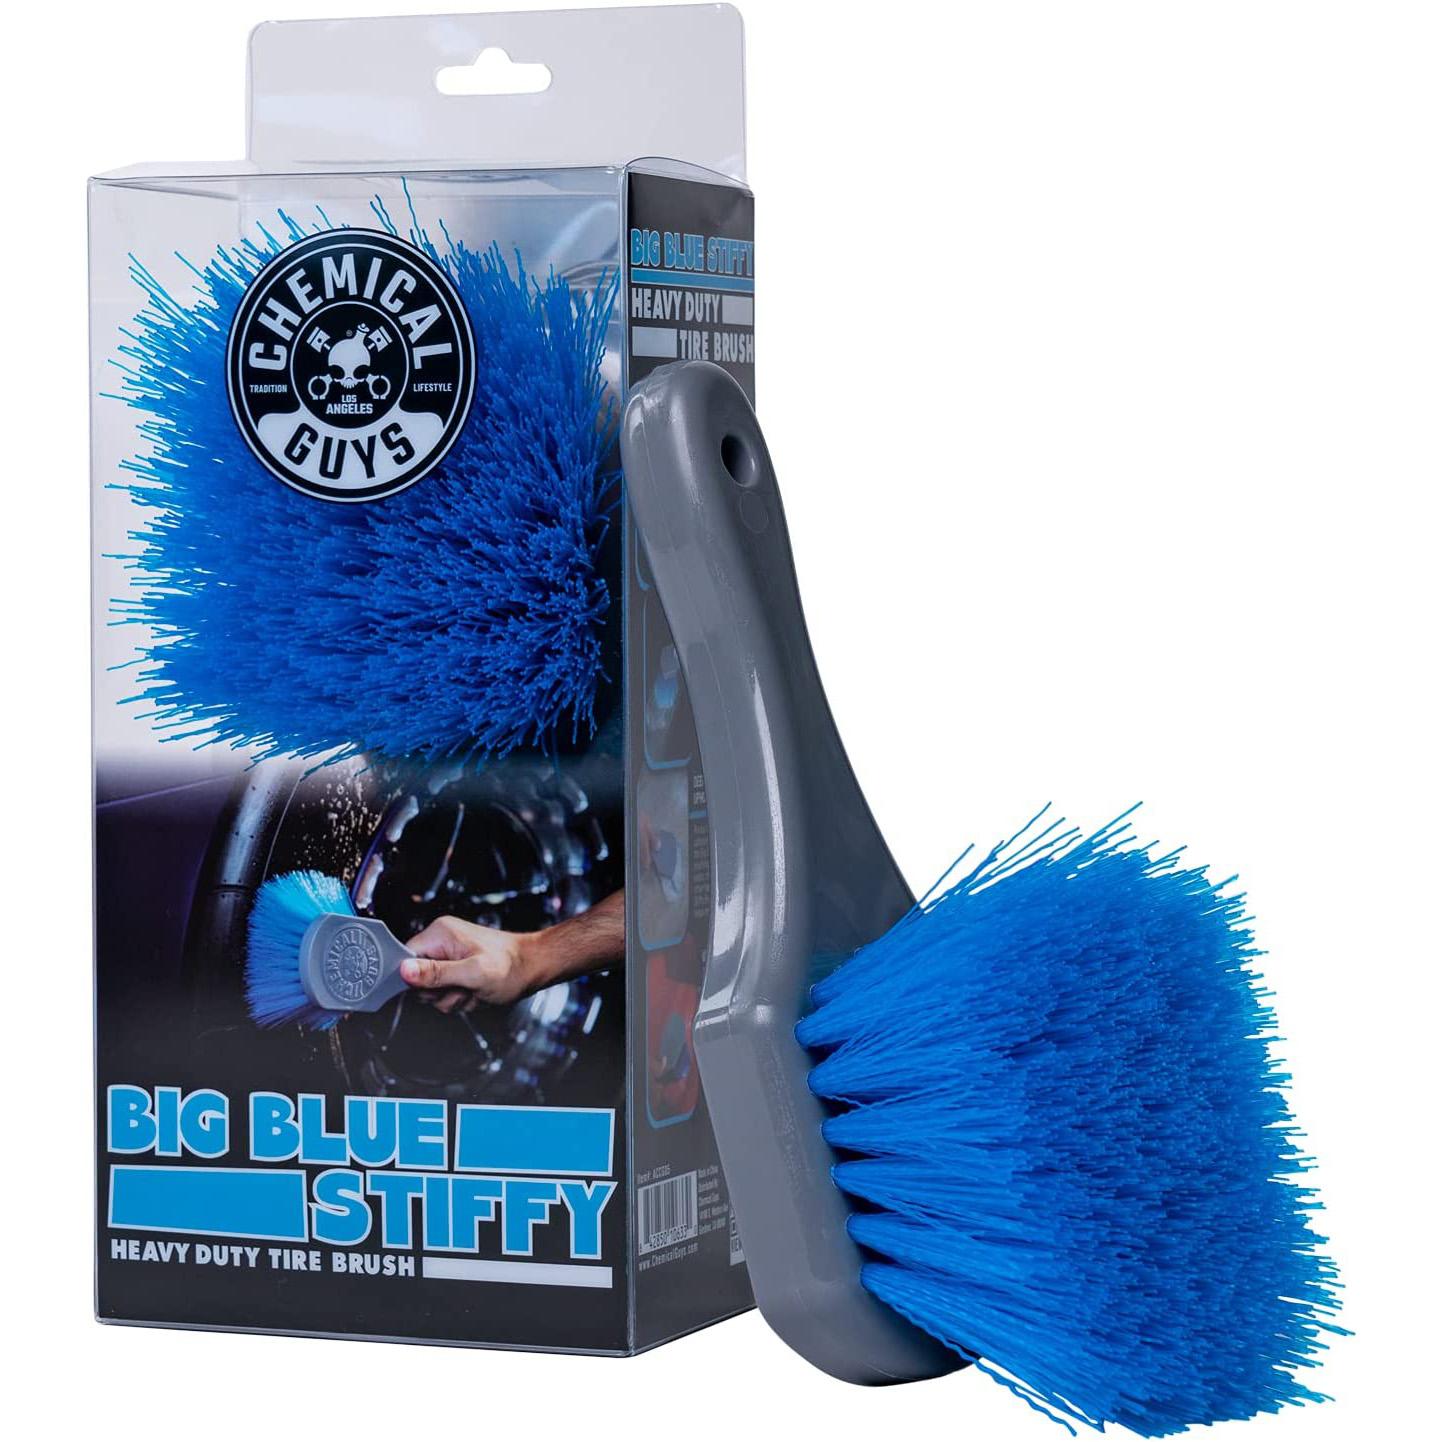 Chemical Guys Big Blue Stiffy Heavy Duty Tire and Upholstry Brush for $5.27 Shipped